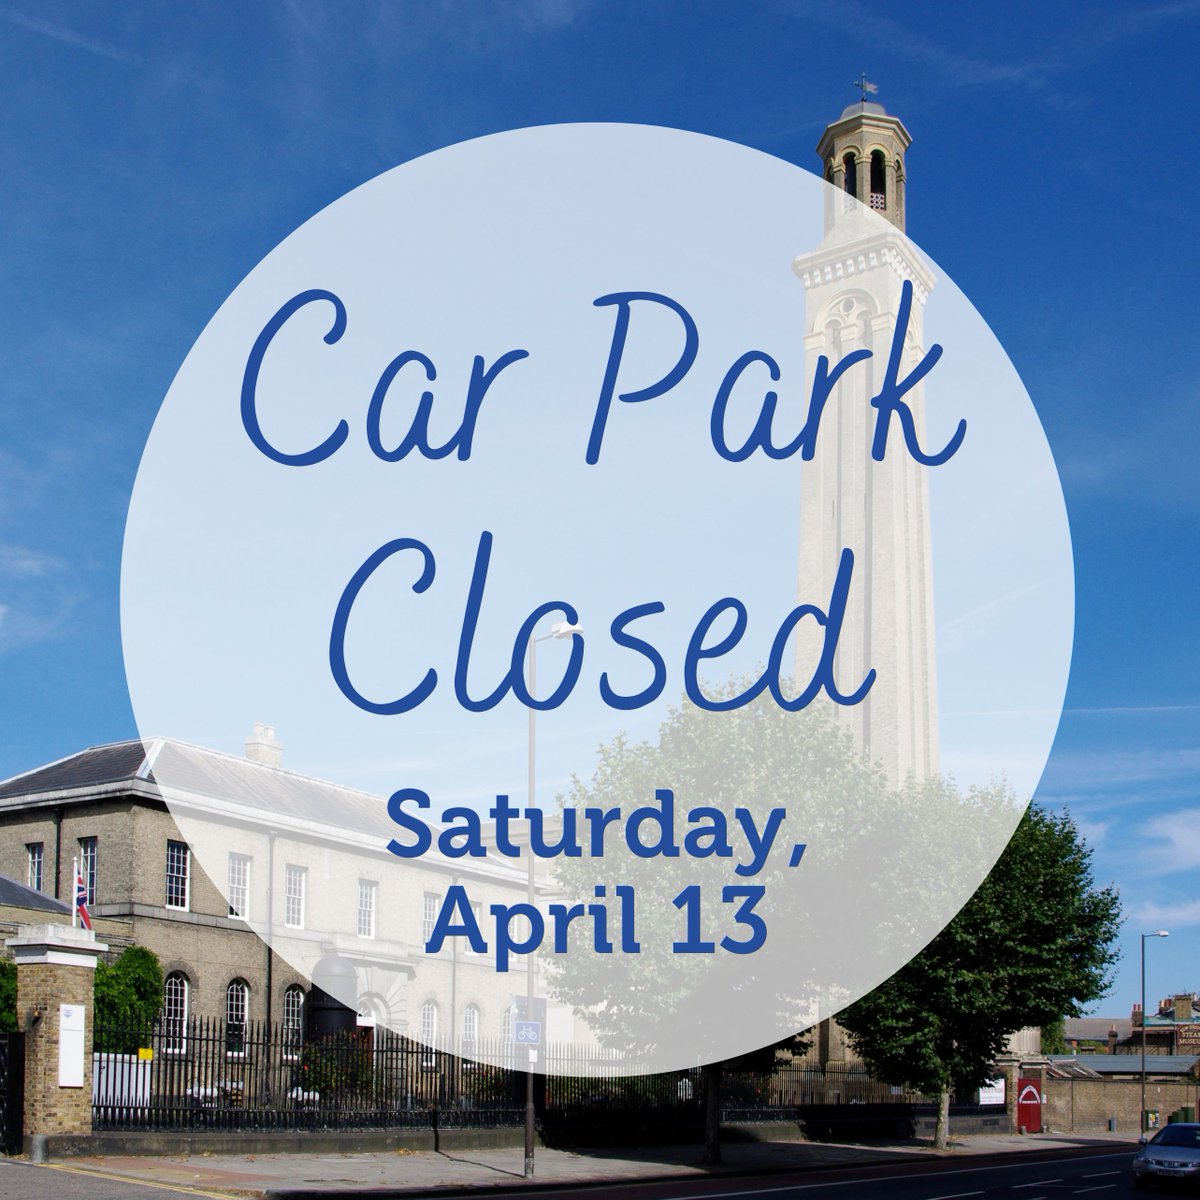 The Museum car park will be closed Saturday April 13 for the Brentford FC home match. Luckily the best way to get to the museum is by public transport, head to our website for how to find us. waterandsteam.org.uk/plan-your-visi…